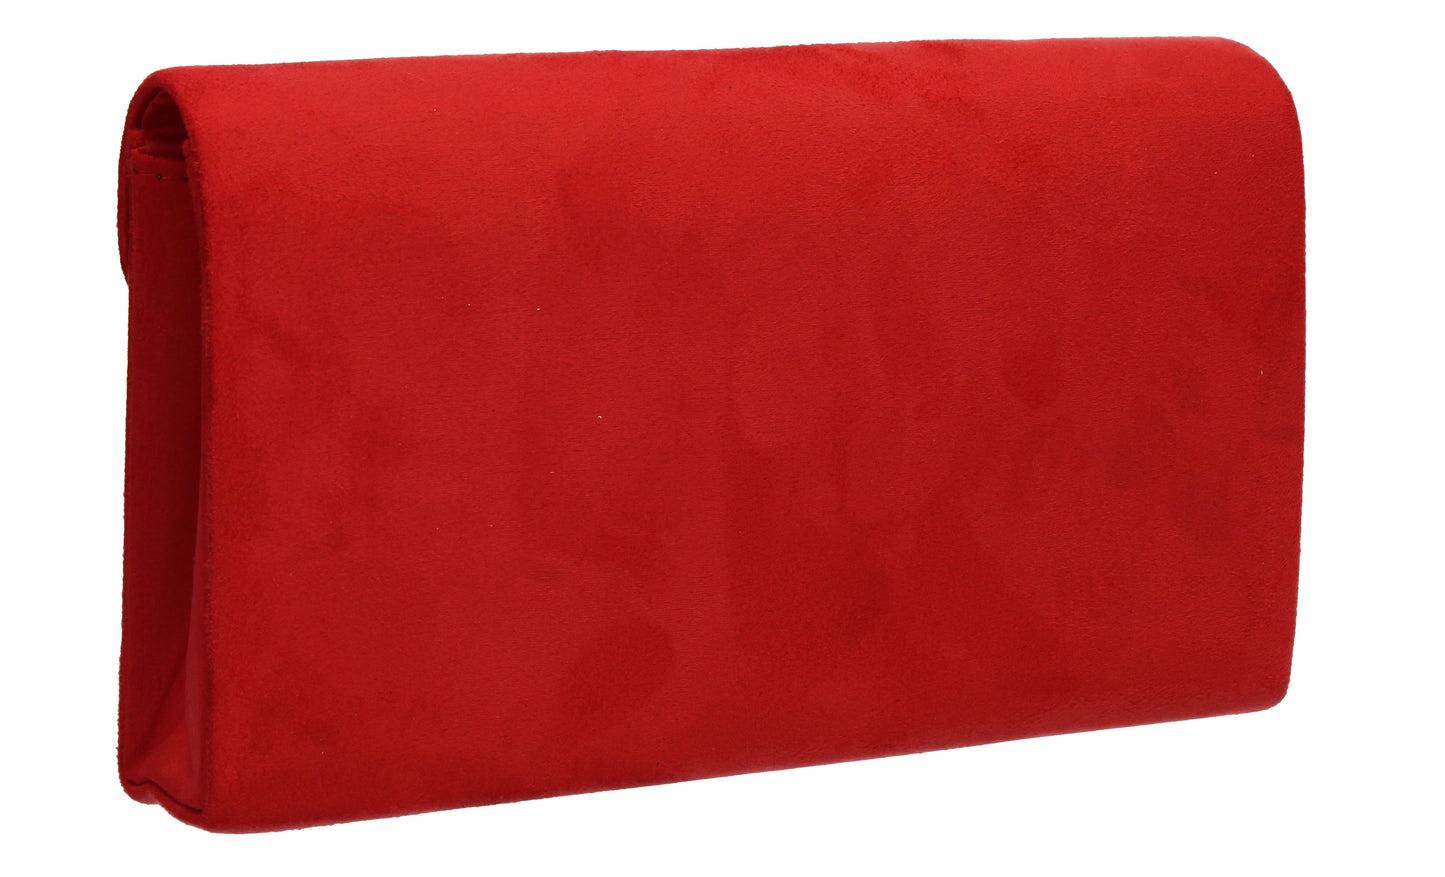 Poppy Faux Suede Envelope Clutch Bag Red